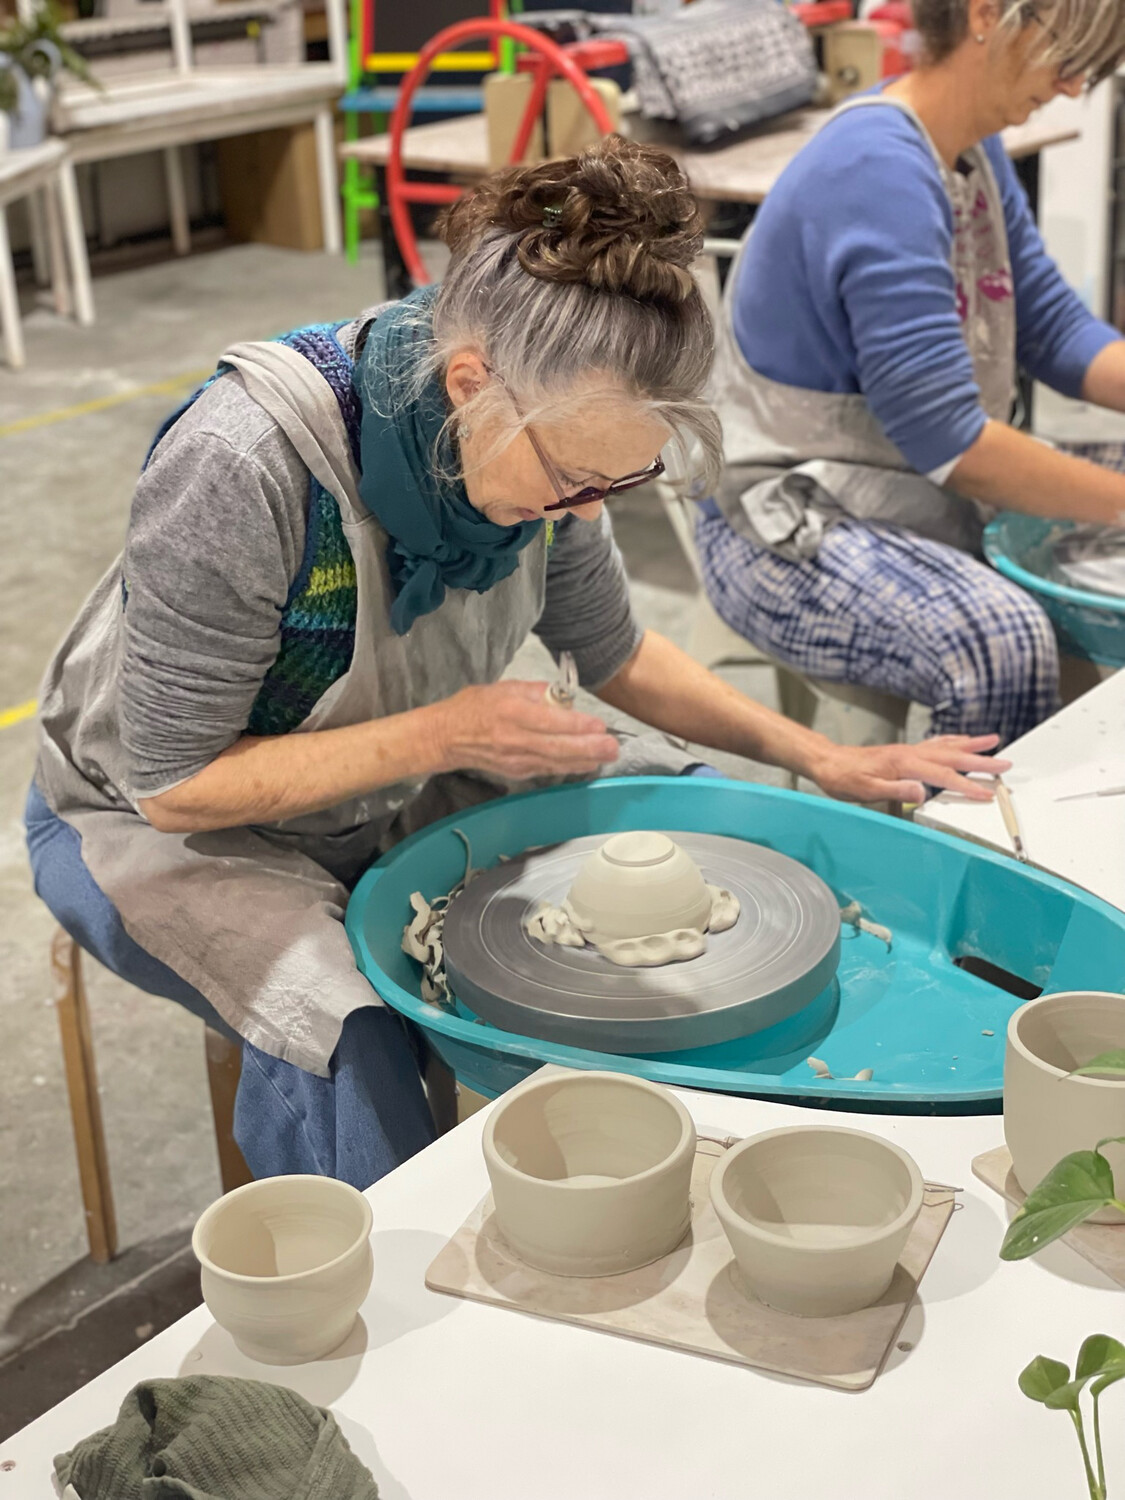 Slip, Spin & Sculpt! 4 week clay course, starting Saturdays 11th March  11-1pm